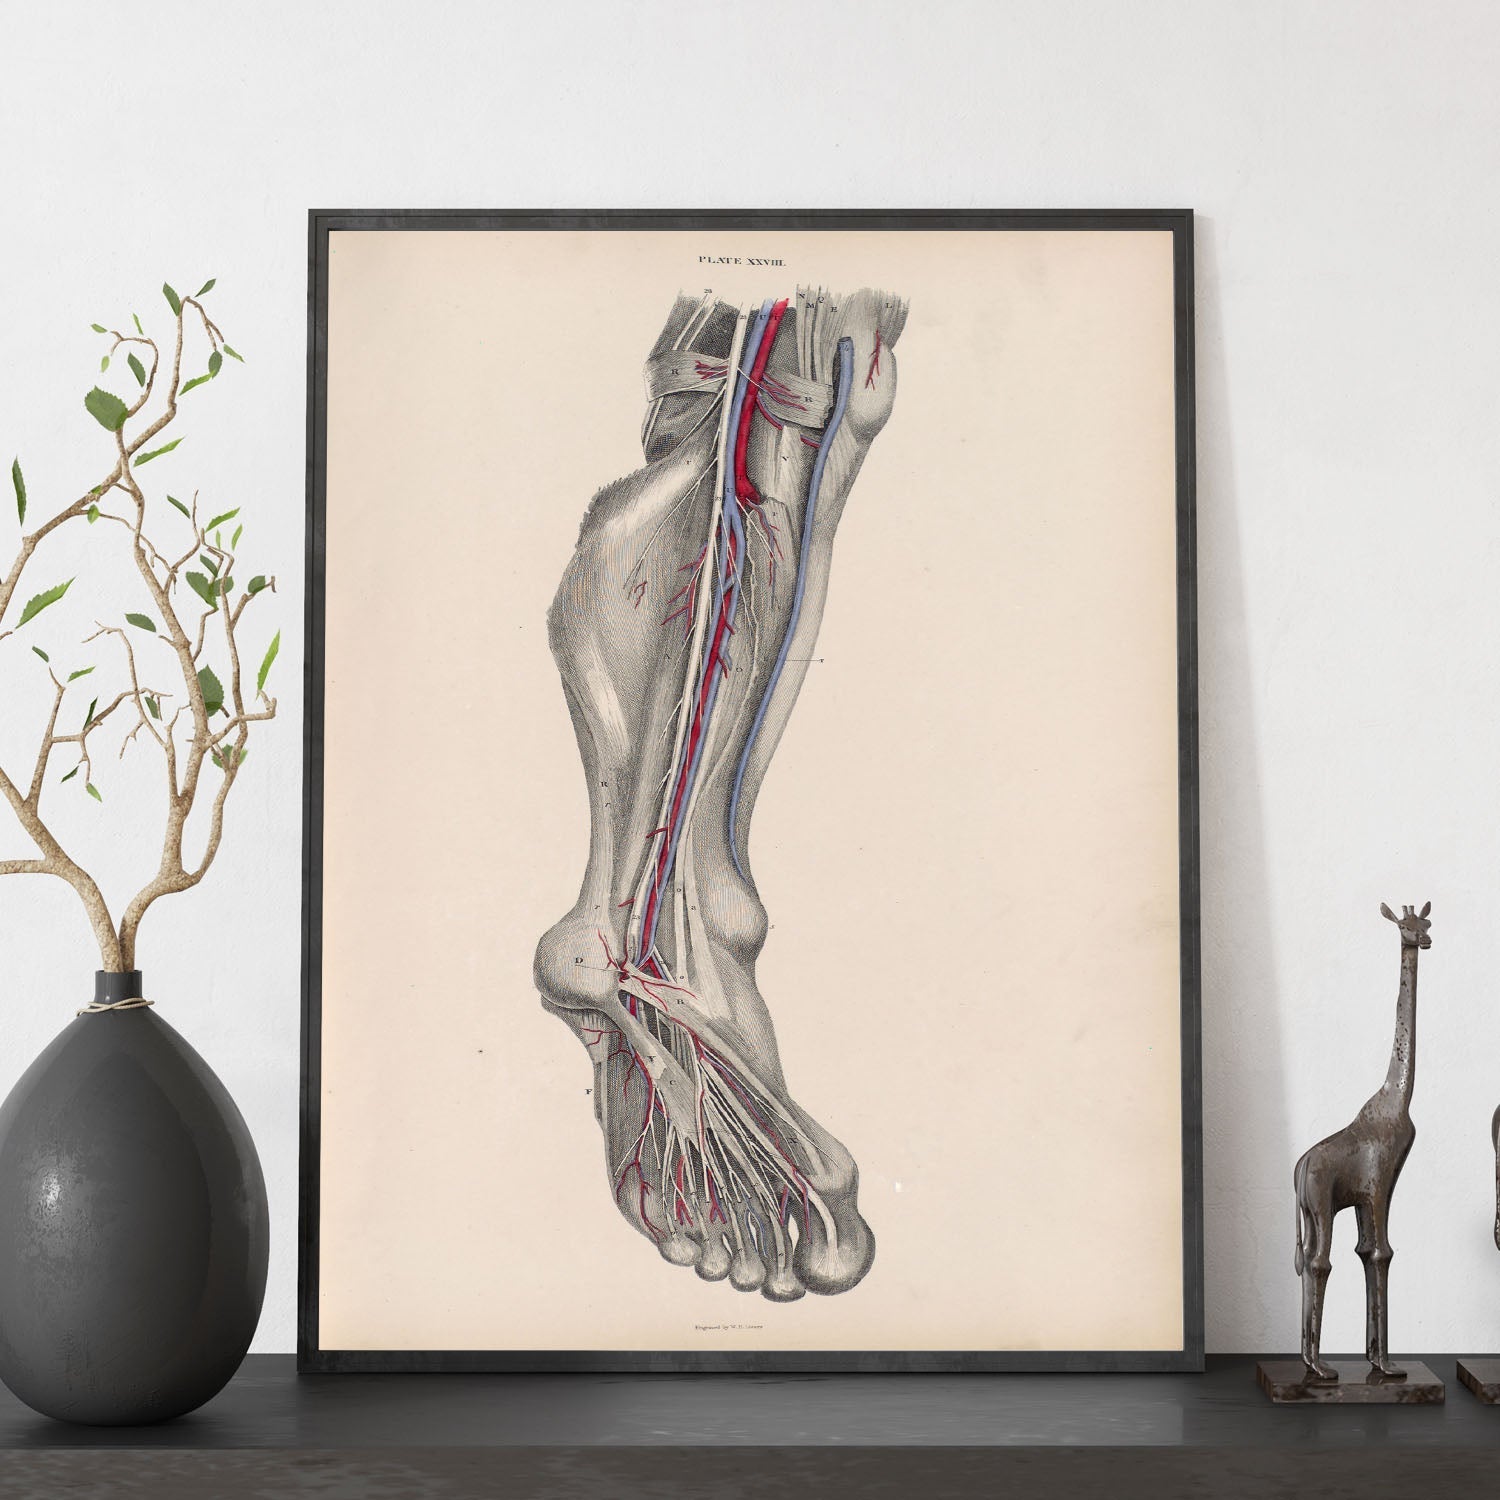 Dissection of the lower leg and foot-Artwork-Nacnic-Nacnic Estudio SL